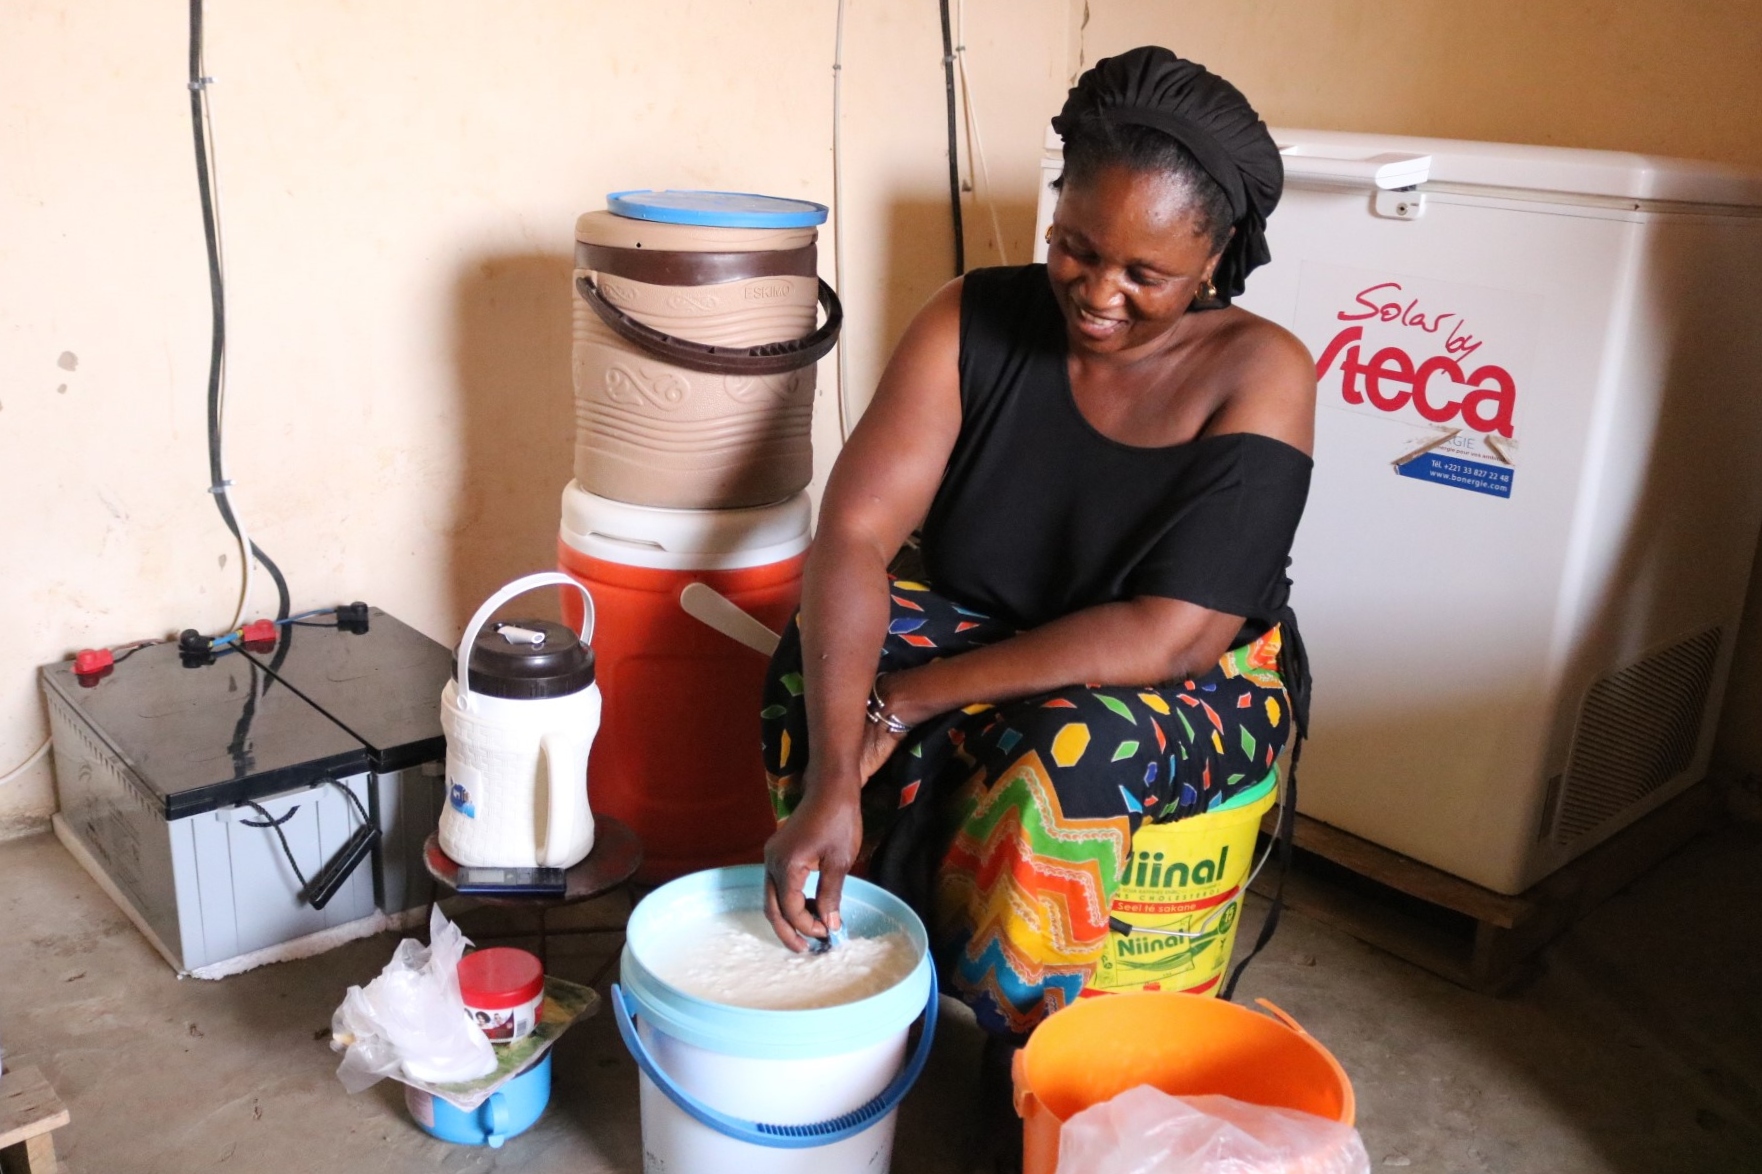 ENERGIA’s Covid-19 solidarity fund helps Awa realise her dreams of expansion